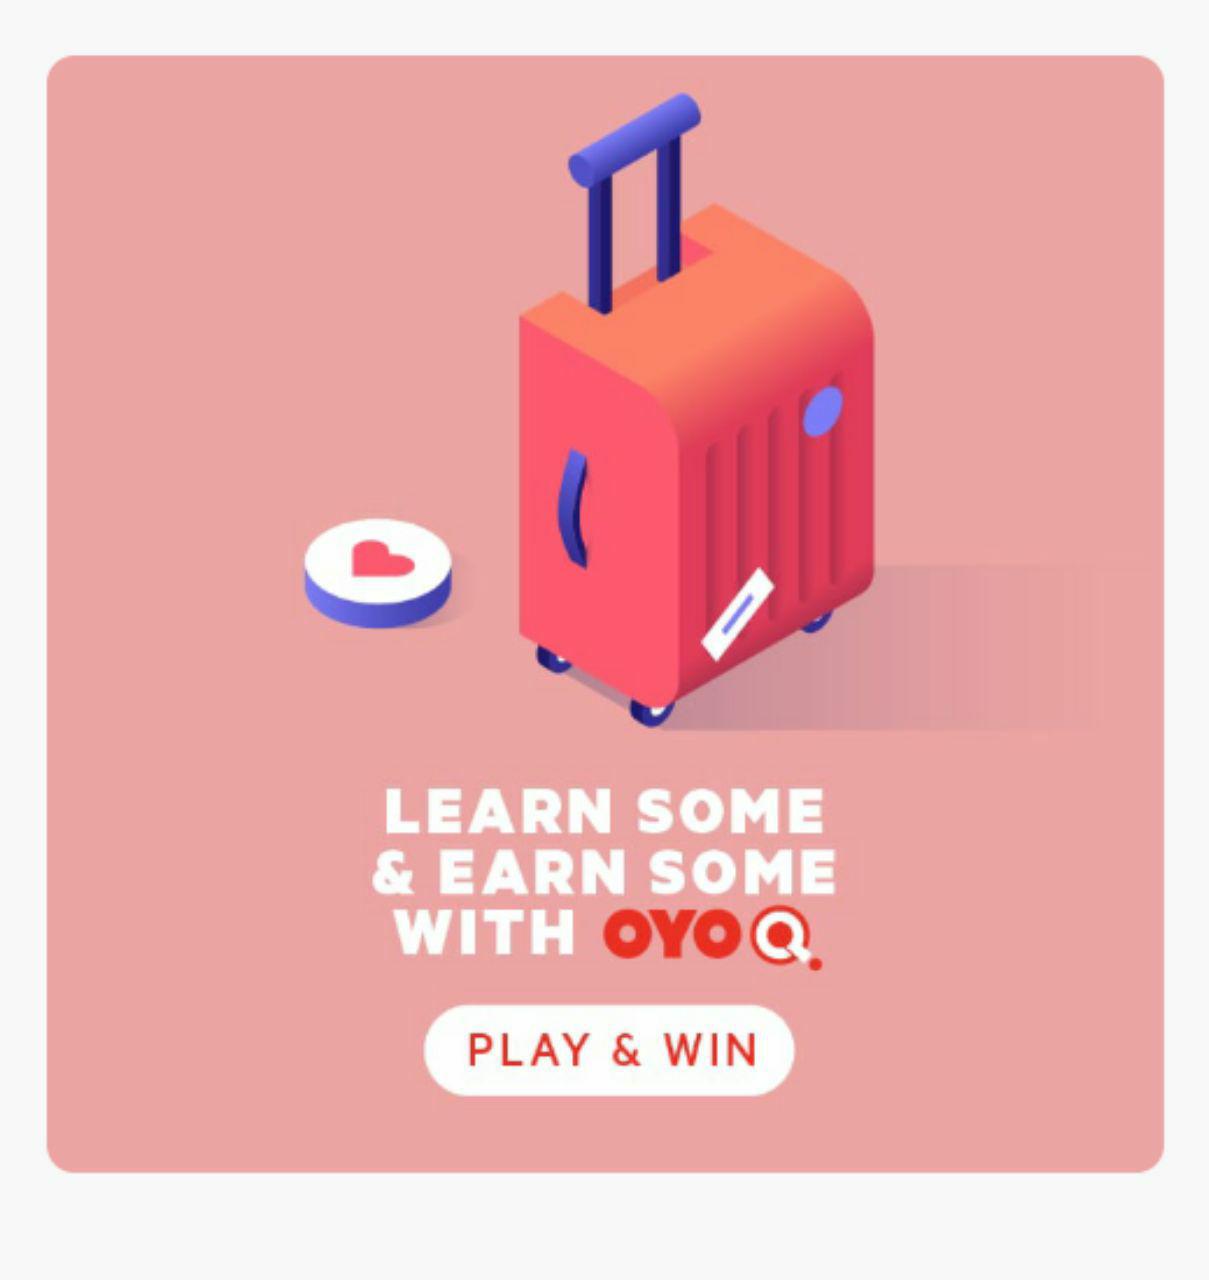 OYO Q quiz answers, today Oyo quiz answers, Oyo paytm quiz answers, Oyo quiz today answers, Oyo quiz answers 2019, answer correctly to win Paytm Cash, Win Amazon Echo Dot and many other prizes